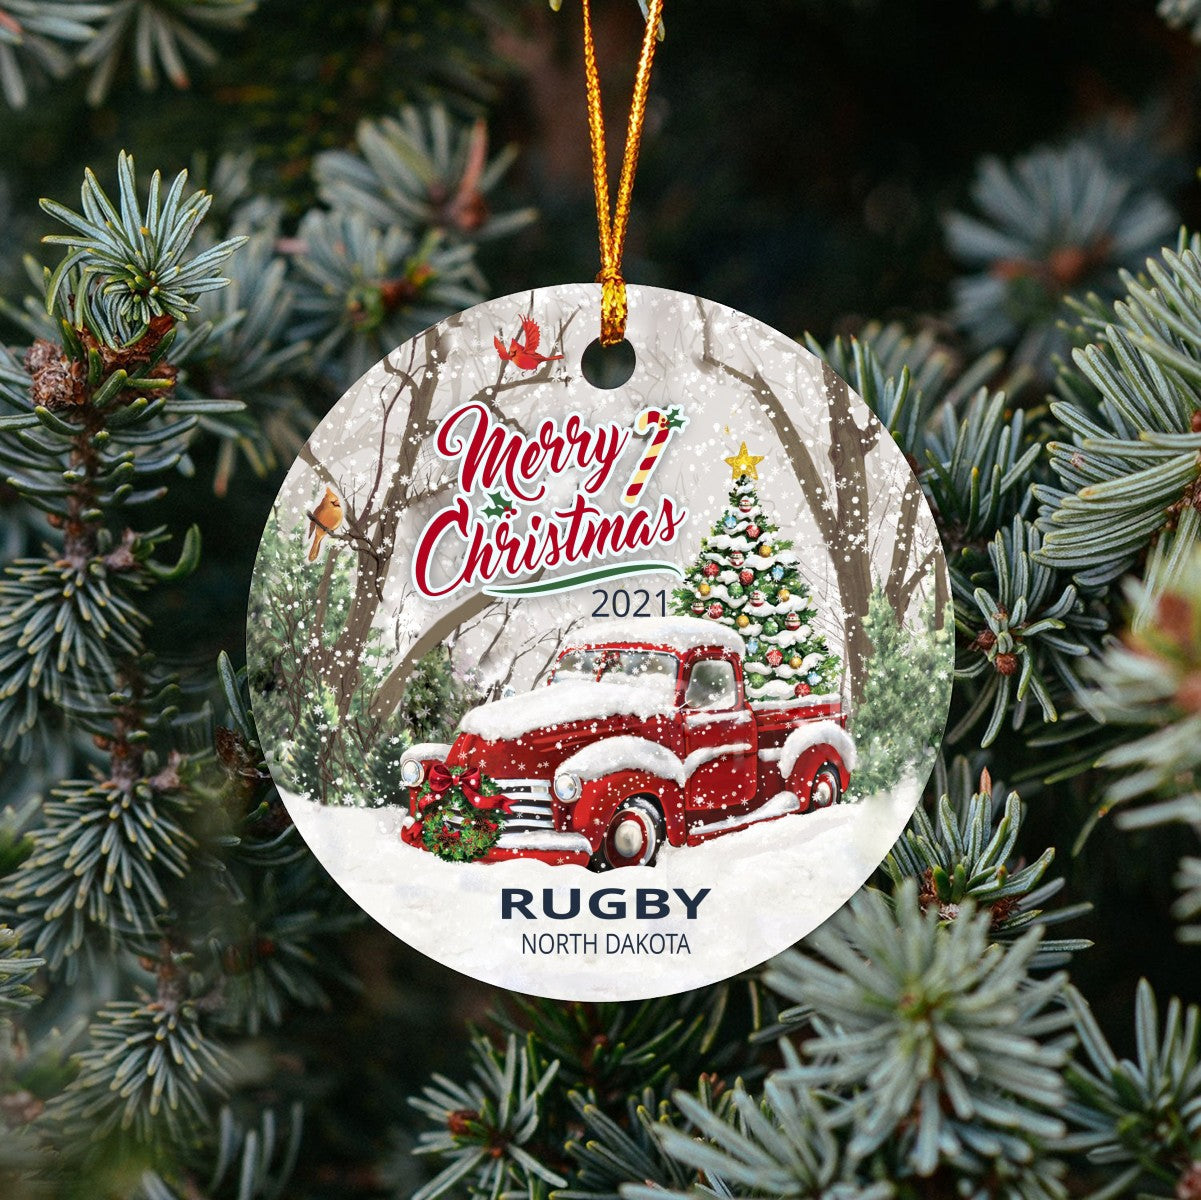 Christmas Tree Ornaments Rugby - Ornament With Name City, State Rugby North Dakota ND Ornament - Red Truck Xmas Ornaments 3'' Plastic Gift For Family, Friend And Housewarming